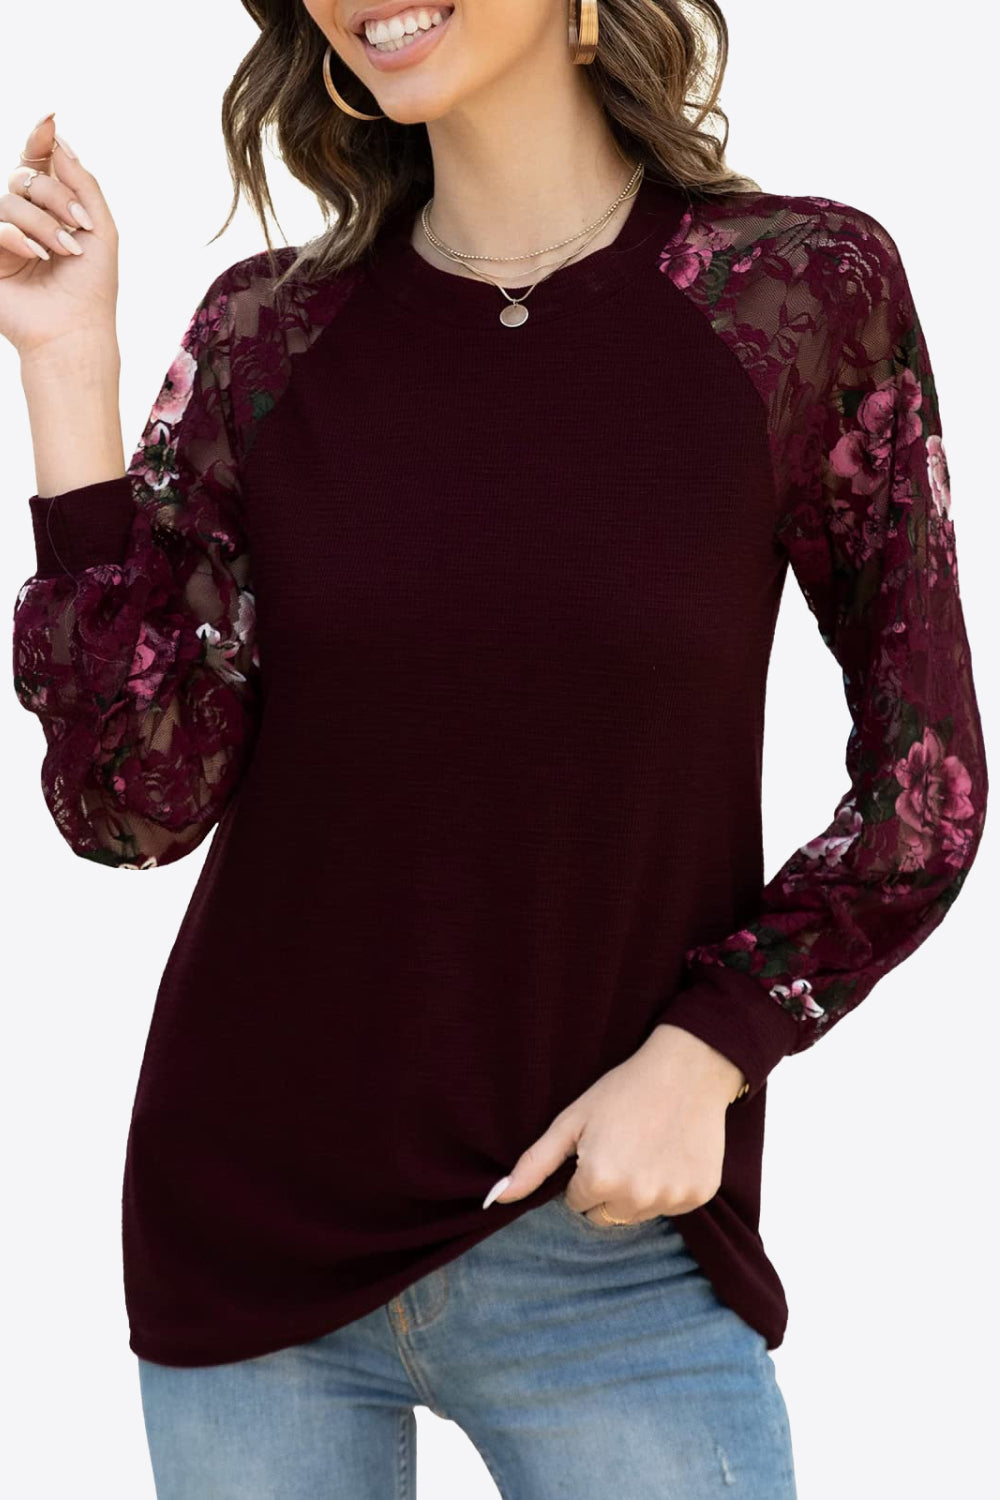 Long Raglan Sleeve Round Neck Tee - Kawaii Stop - A&D, Casual Chic, Classy Tee, Comfortable, Easy Care, Everyday Wear, Fashion Must-Have, Floral Pattern, Machine Wash, No Sheer, Perfect Fit, Polyester Blend, Raglan Sleeve, Rayon Tee, Round Neck, Ship From Overseas, Shipping Delay 09/29/2023 - 10/04/2023, Solid Color, Stylish, T-Shirt, T-Shirts, Tee, Tumble Dry, Versatile, Wardrobe Upgrade, Women's Clothing, Women's Fashion, Women's Top